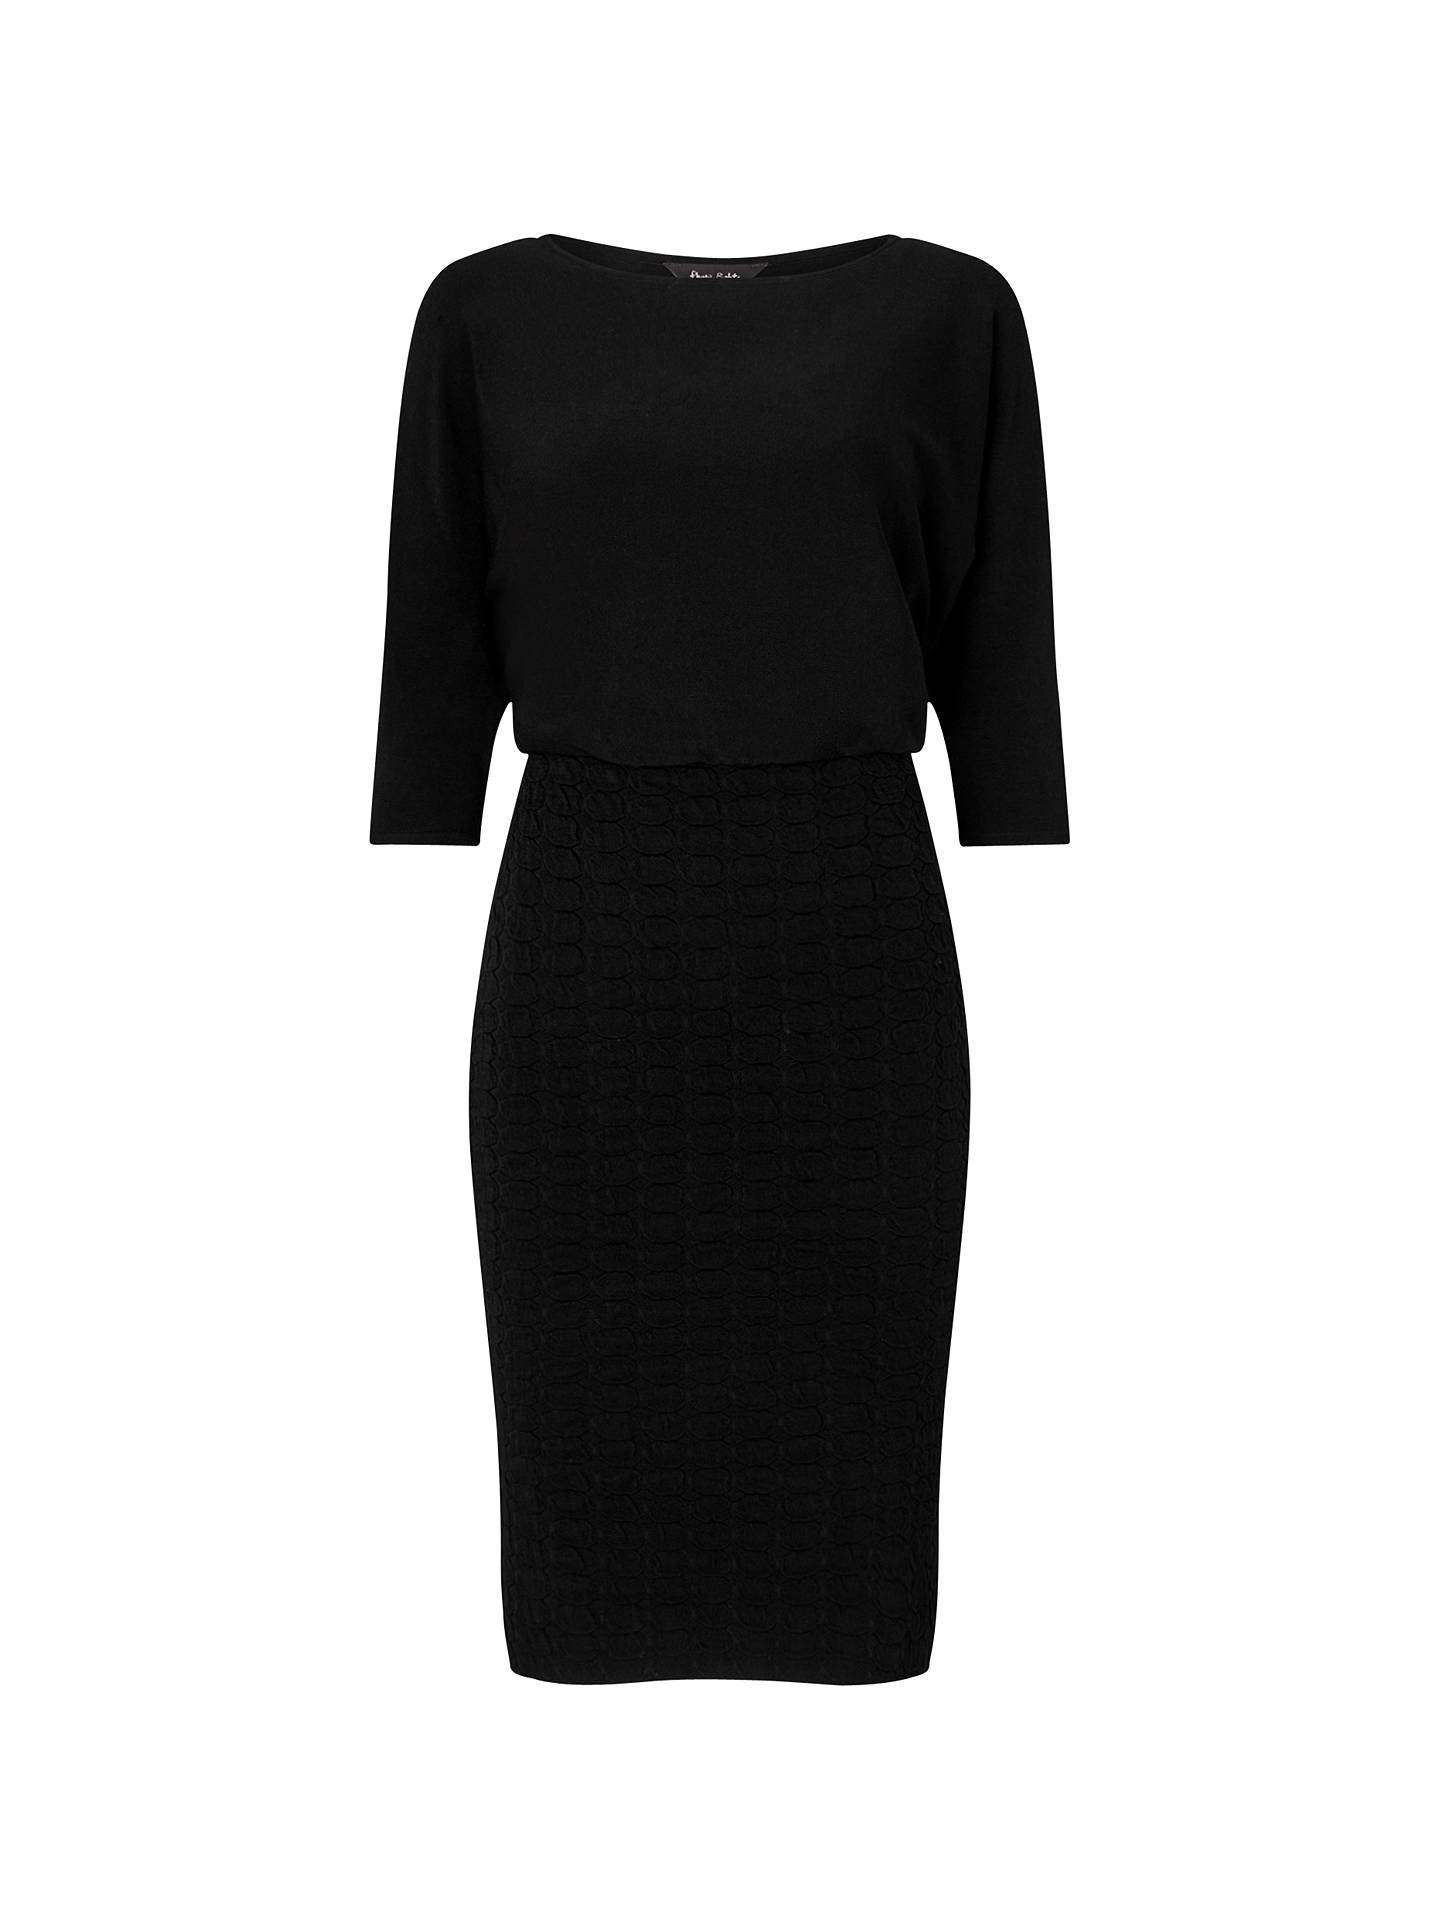 Phase Eight Adele Textured Knitted Dress, Black at John Lewis & Partners